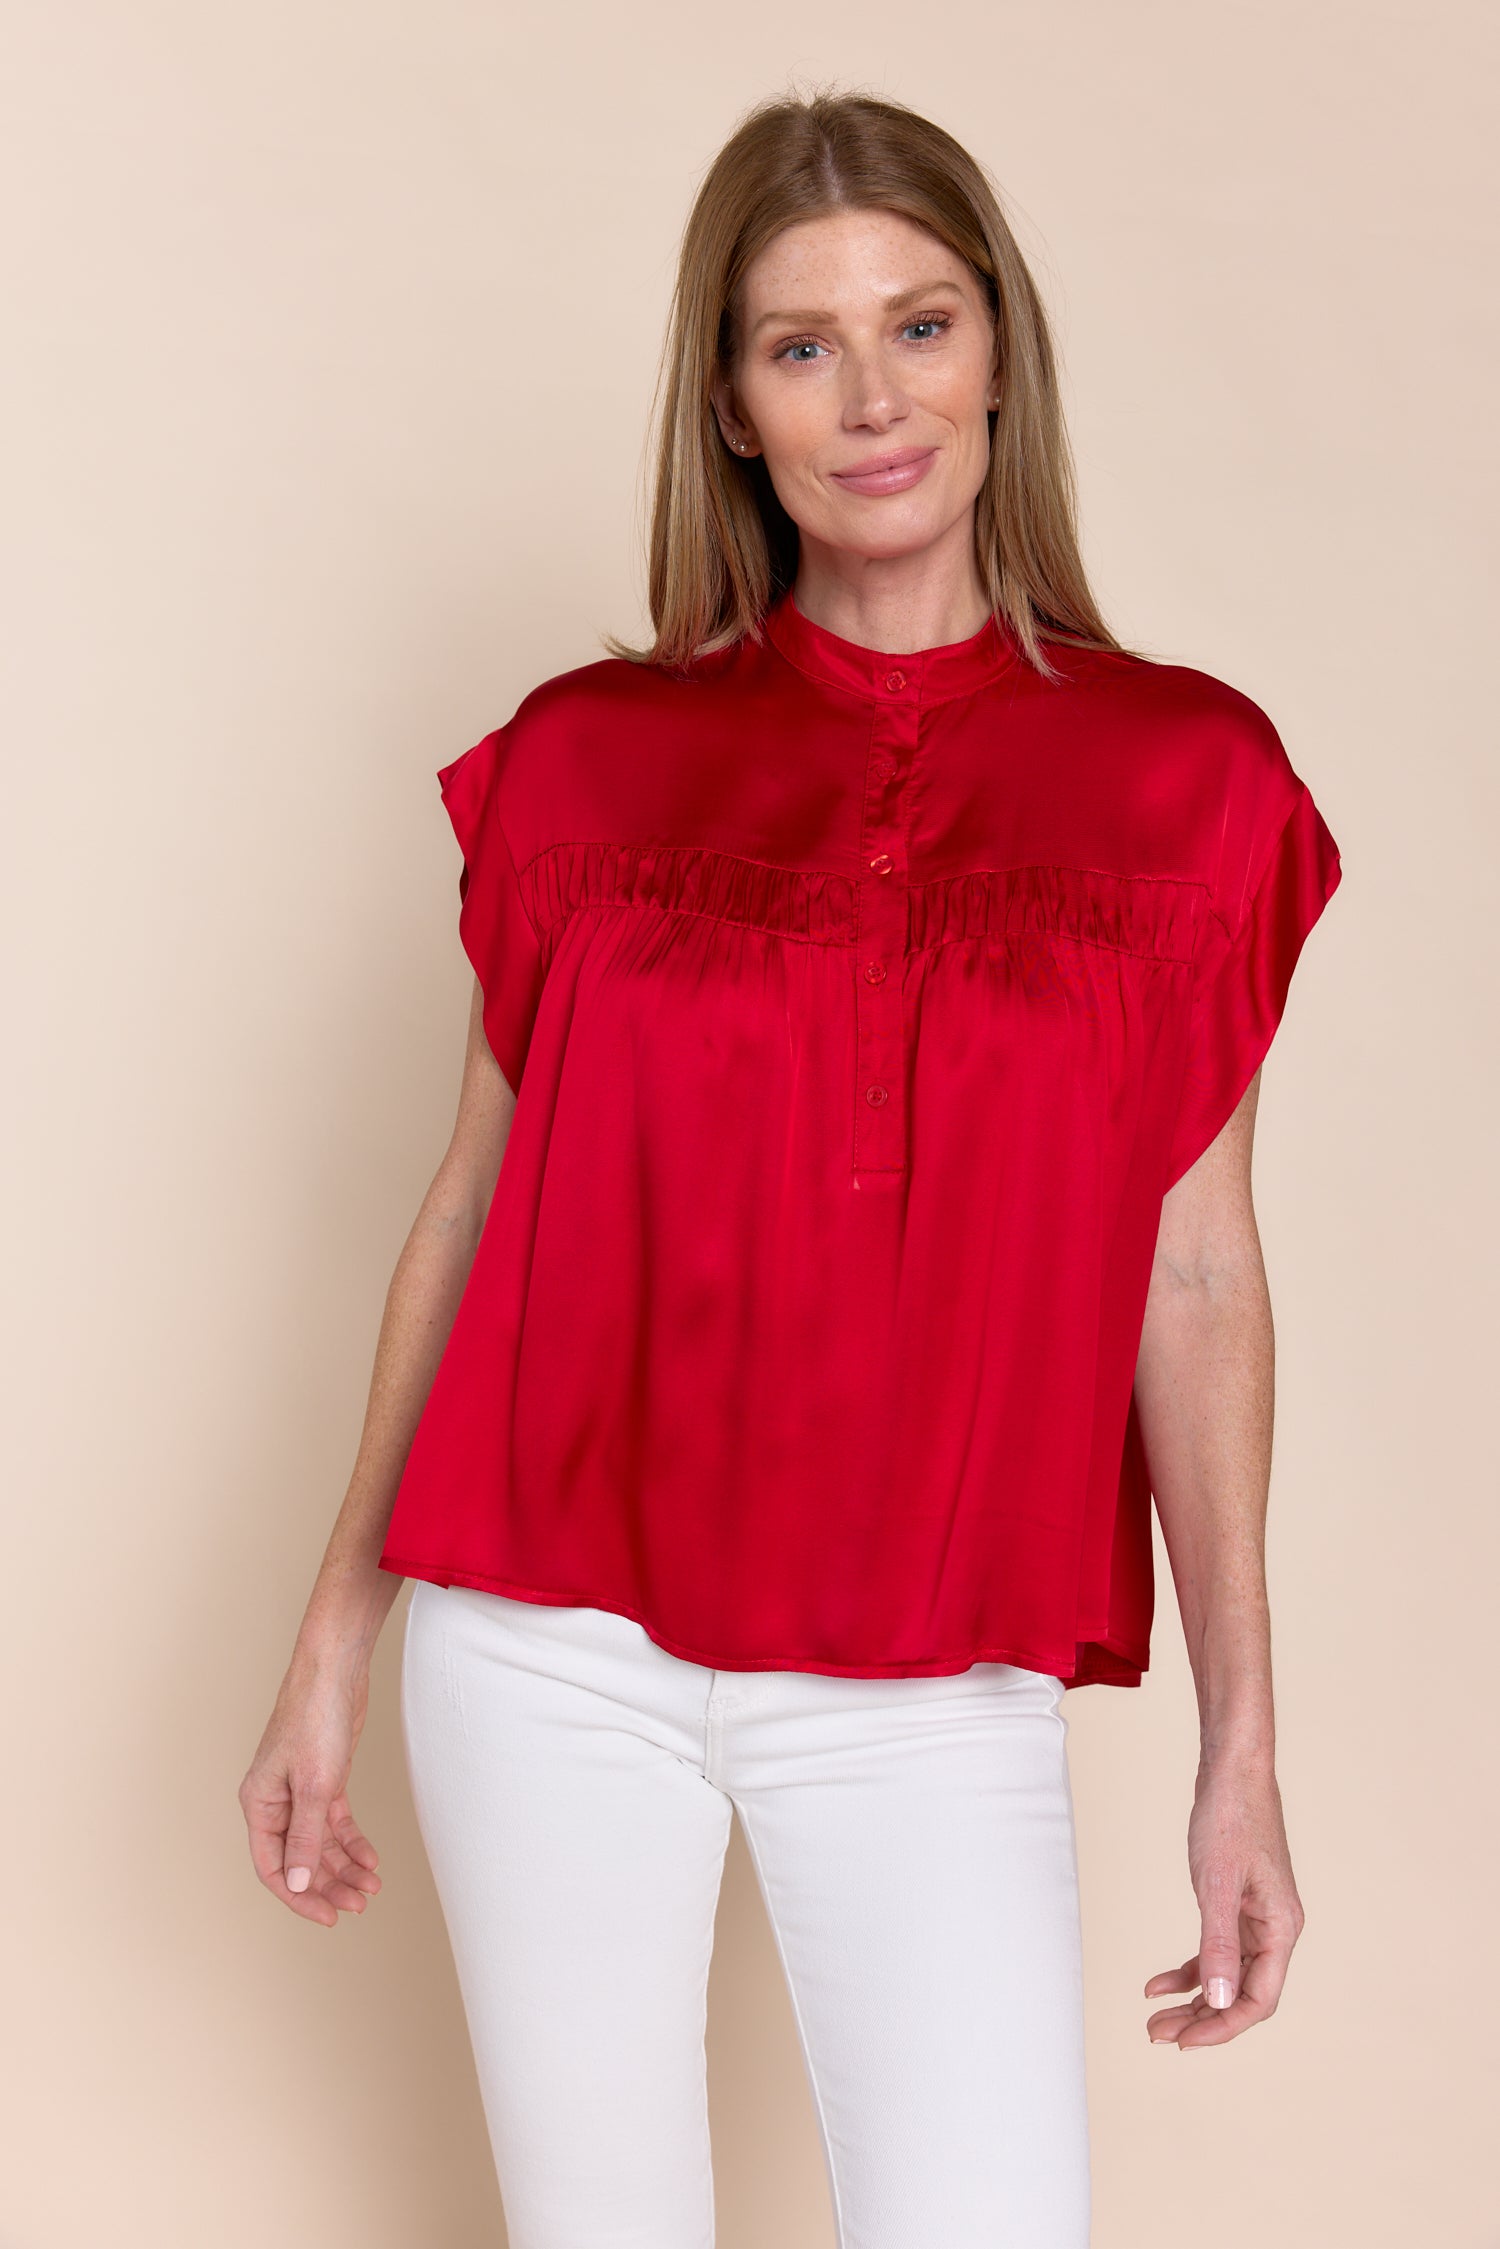 Women for – | Collections Collection Designer Sofia - Sofia Shop Tops Tops Italian